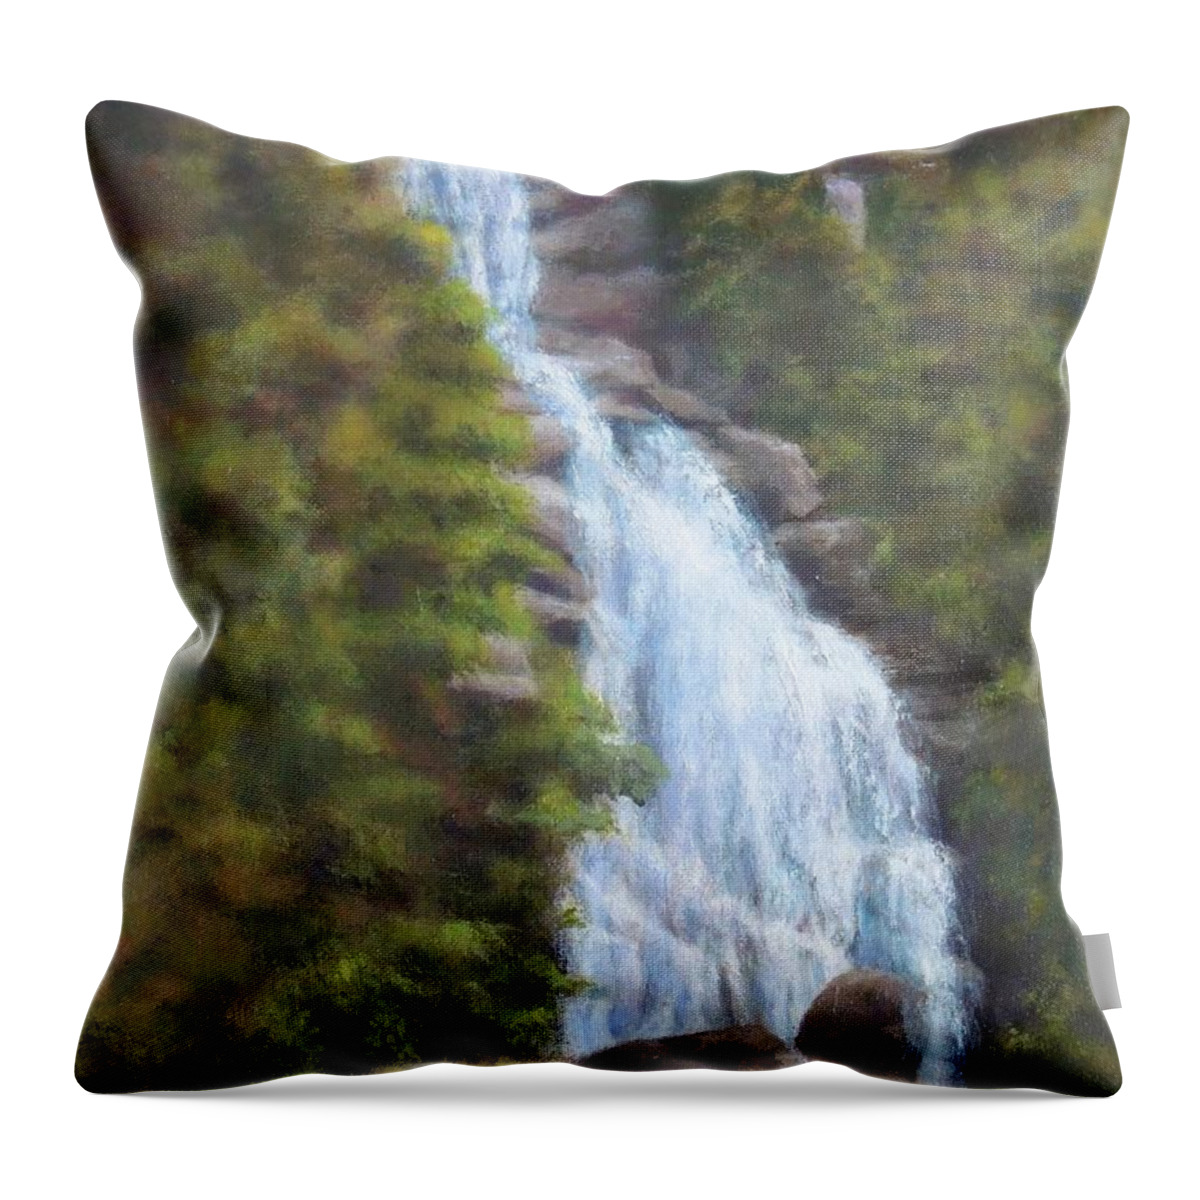 Waterfall Throw Pillow featuring the painting Whitewater Falls I by Phyllis Andrews